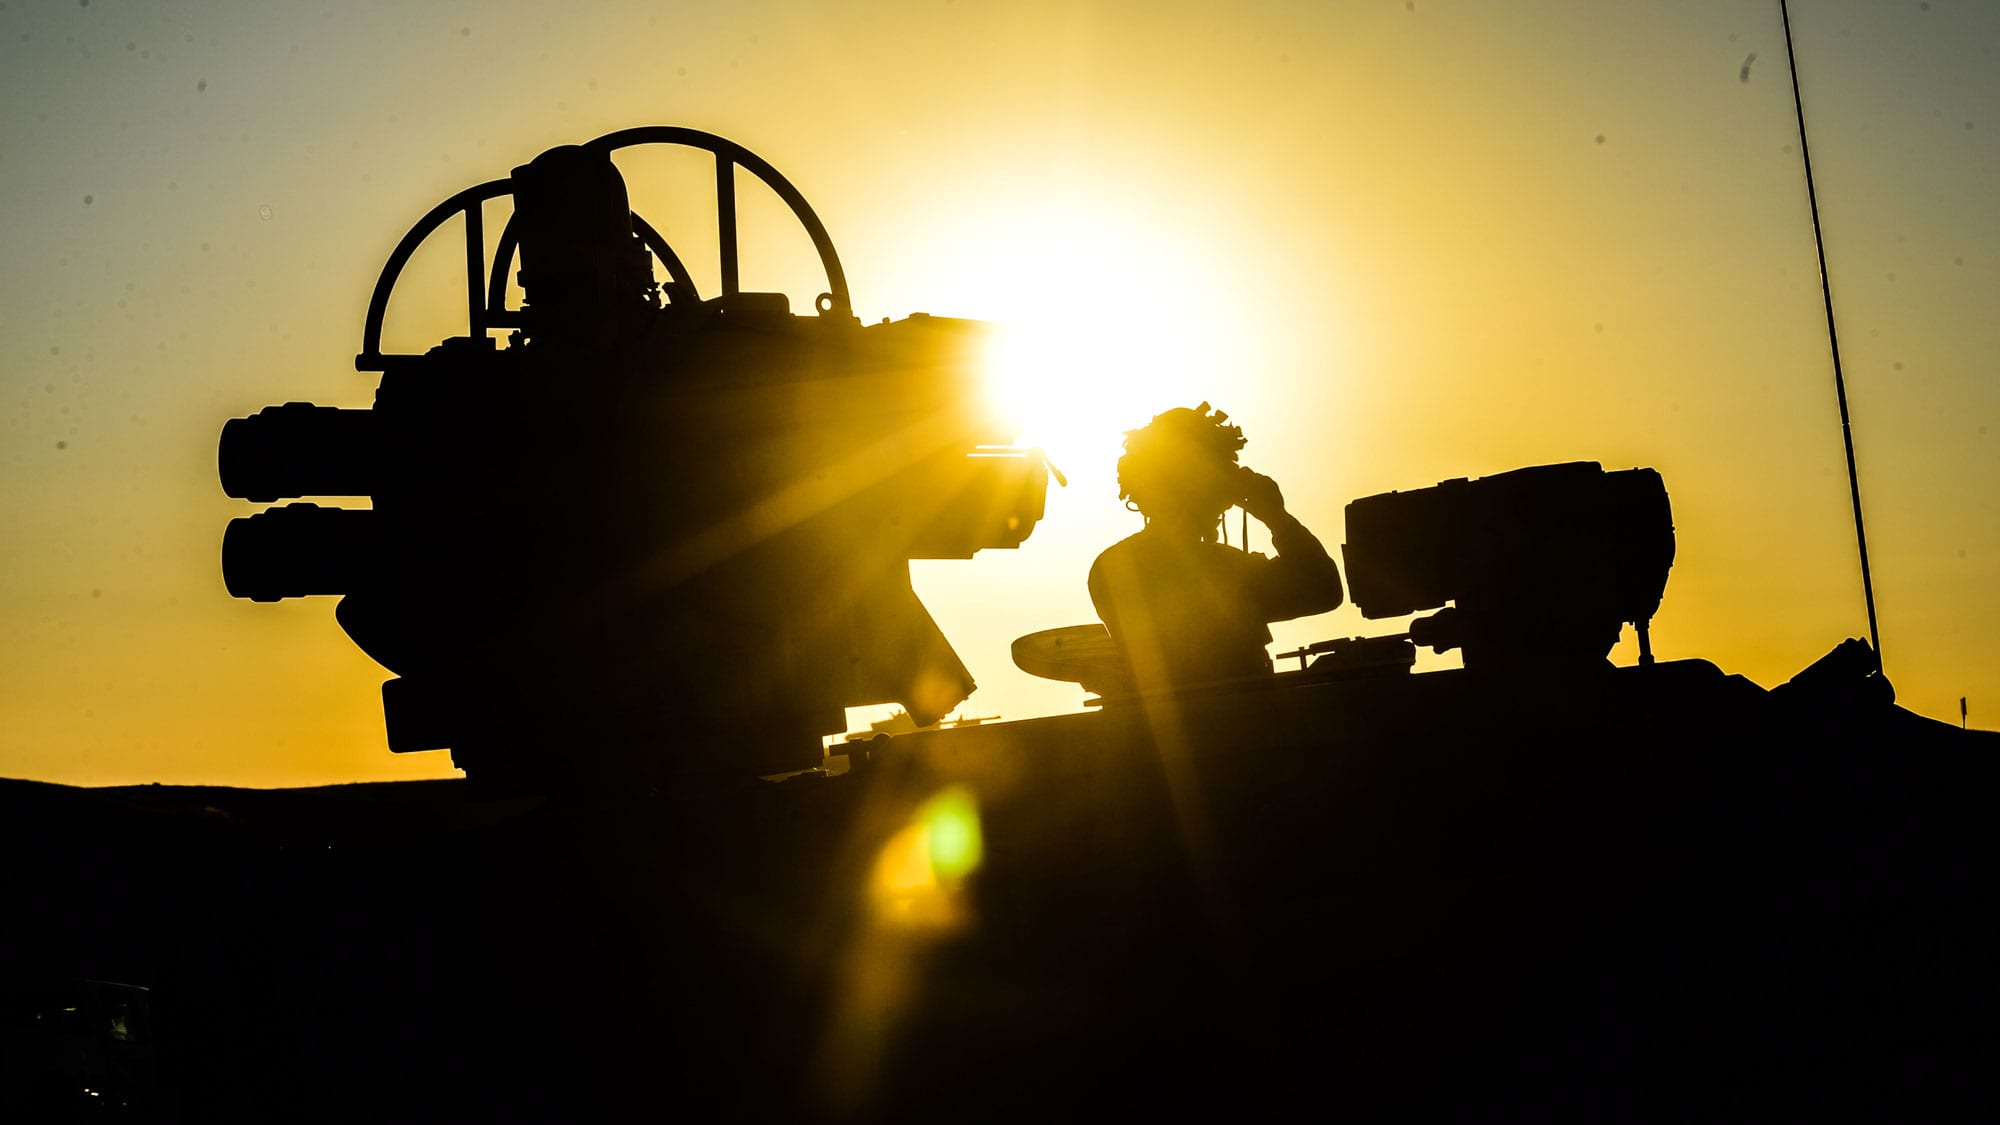 A rocket launcher silhouetted against the sun